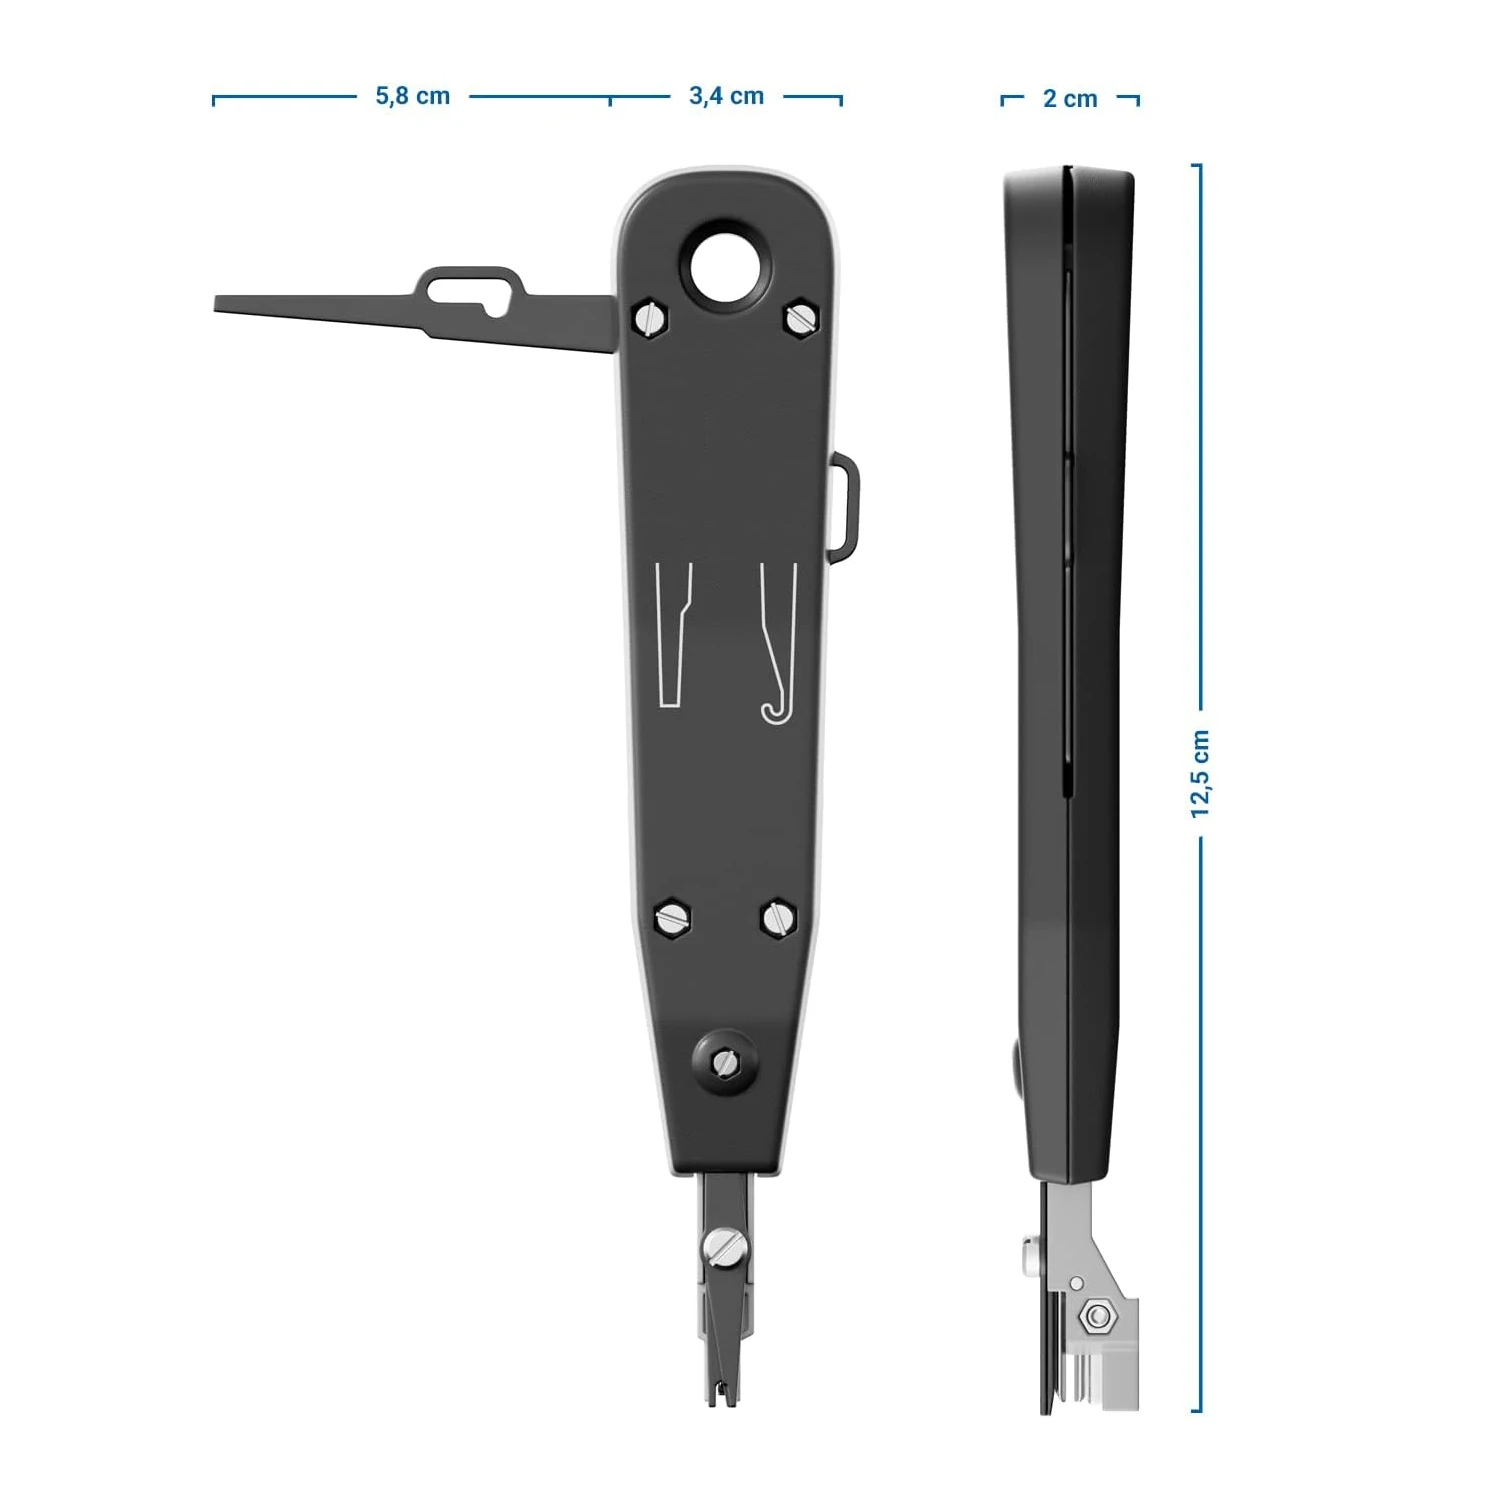 WoeoW Punch Down Tool, Multifunction Krone Type IDC/Network Wire Cat5 Cat6 & Telephone Impact Terminal Insertion Tools